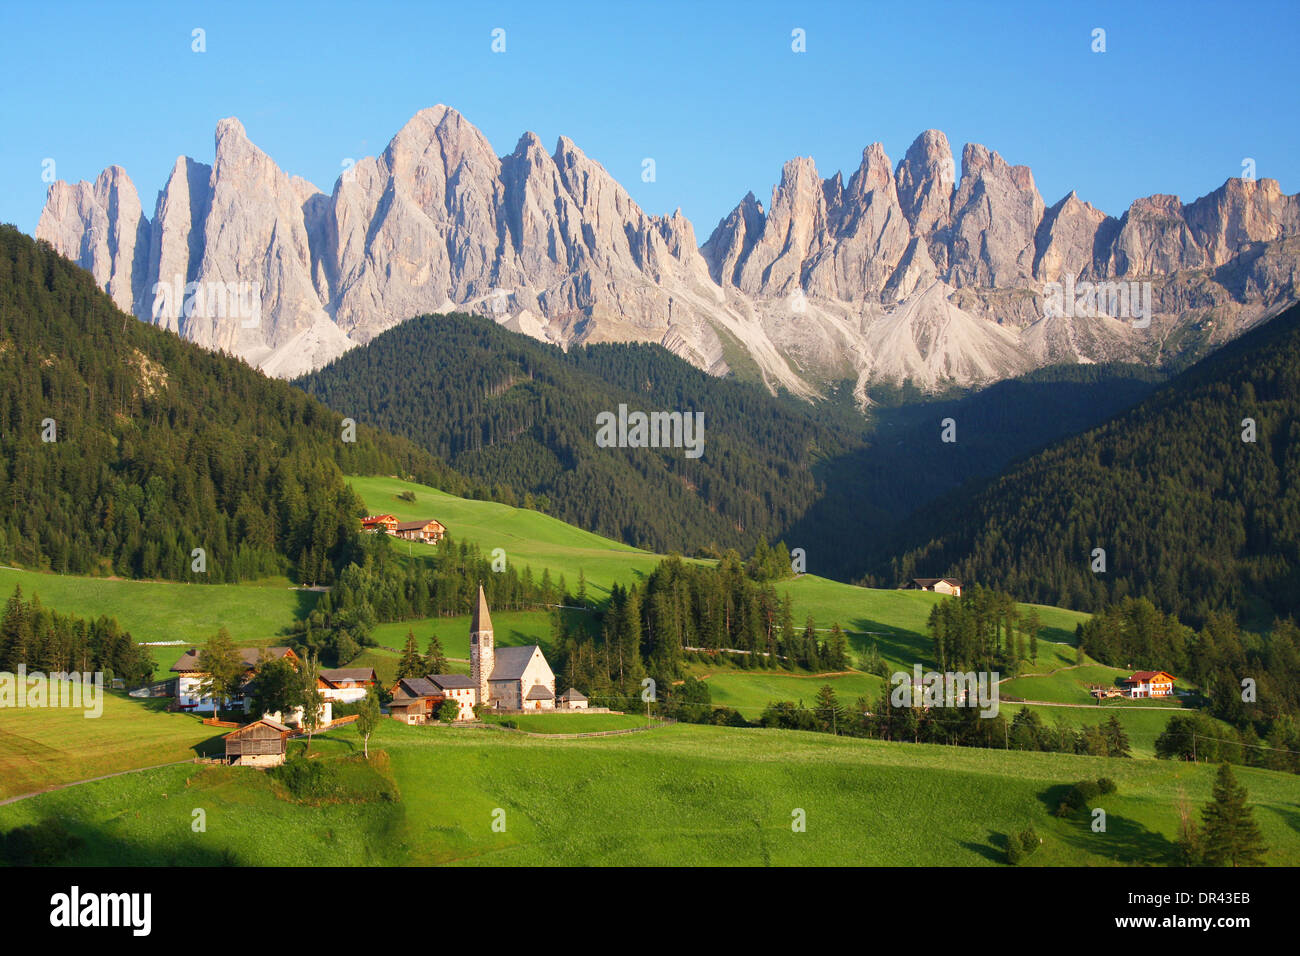 The Dolomites in northern Italy Stock Photo - Alamy